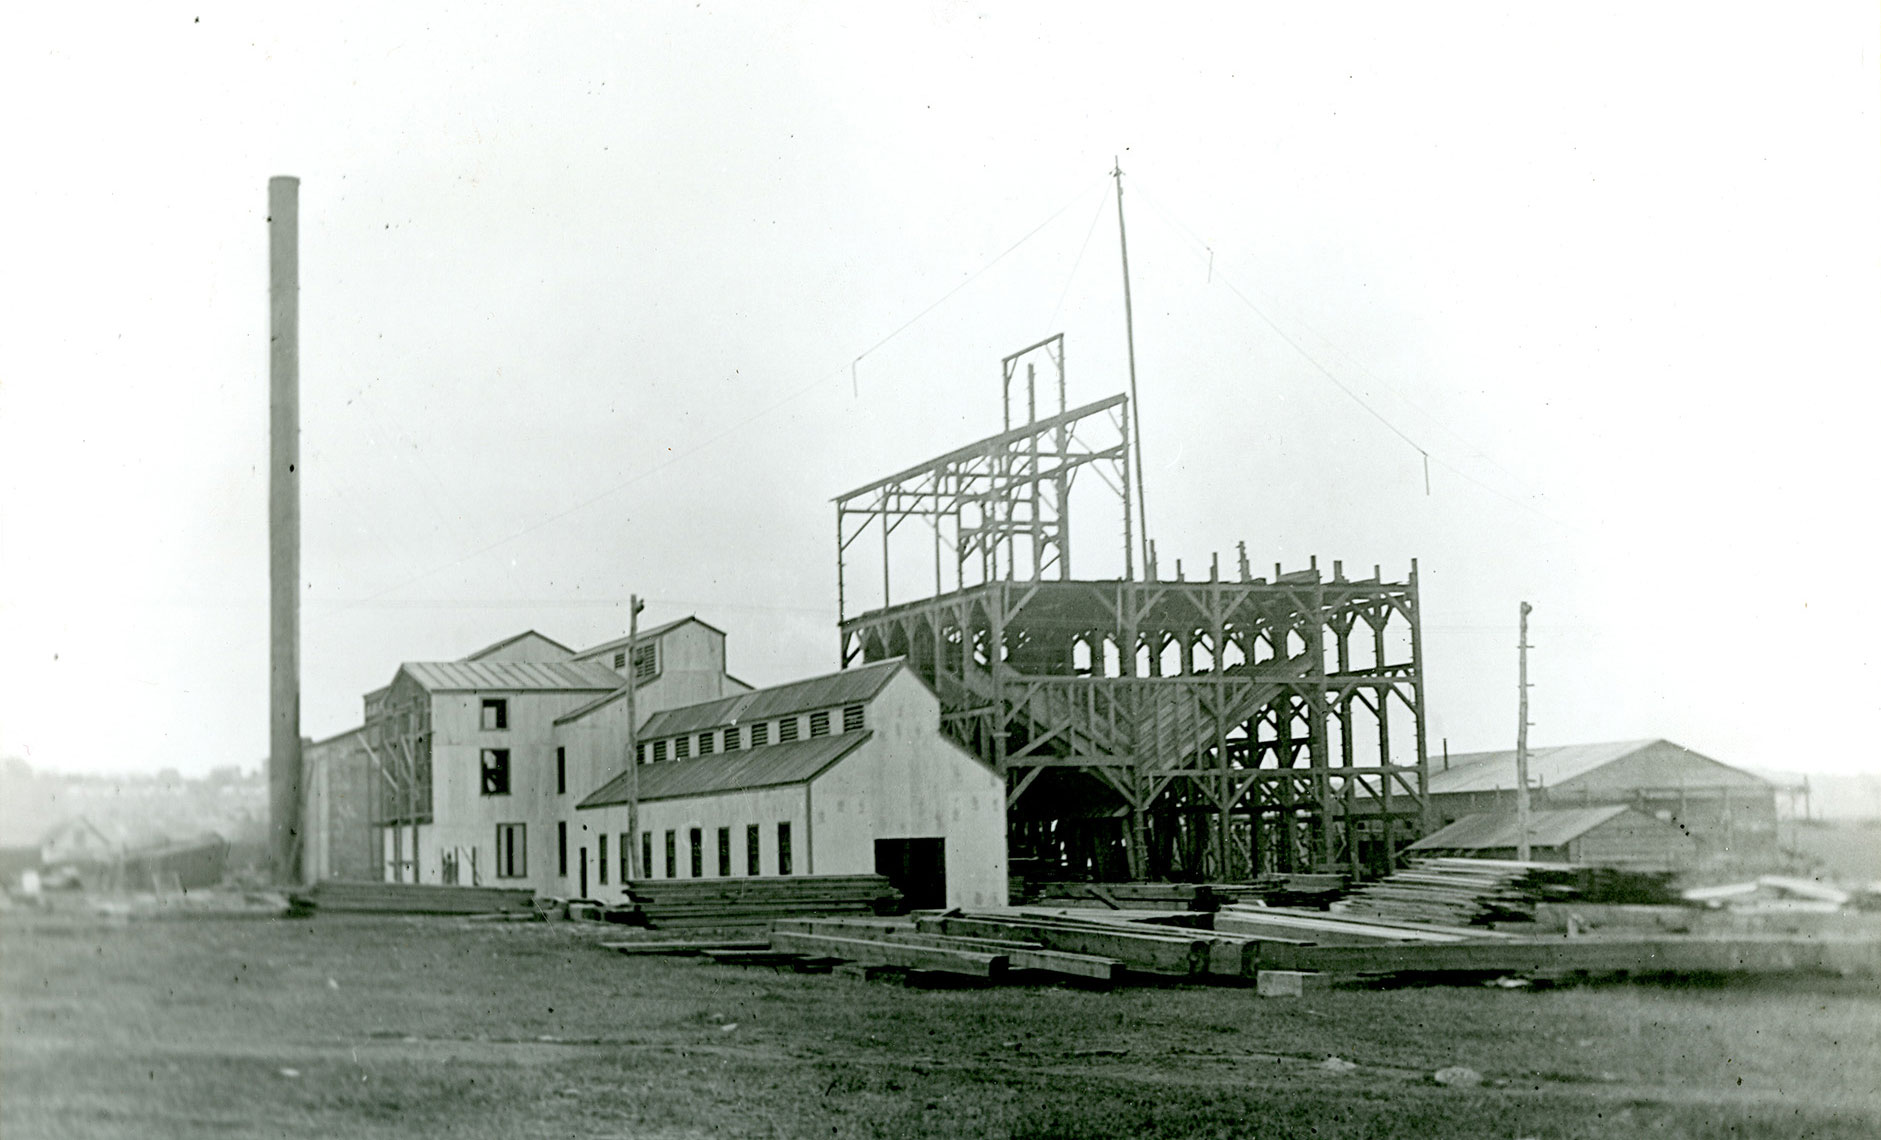 Black and white photo of buildings under construction at the Cranston Coal Mine, Rhode Island, date uncertain. The photo shows a partially completed complex of buildings, some with siding on them and some still being framed. On the left of the complex, a tall structure may be a smokestack. A pile of building material is in the right foreground in front of the structures.